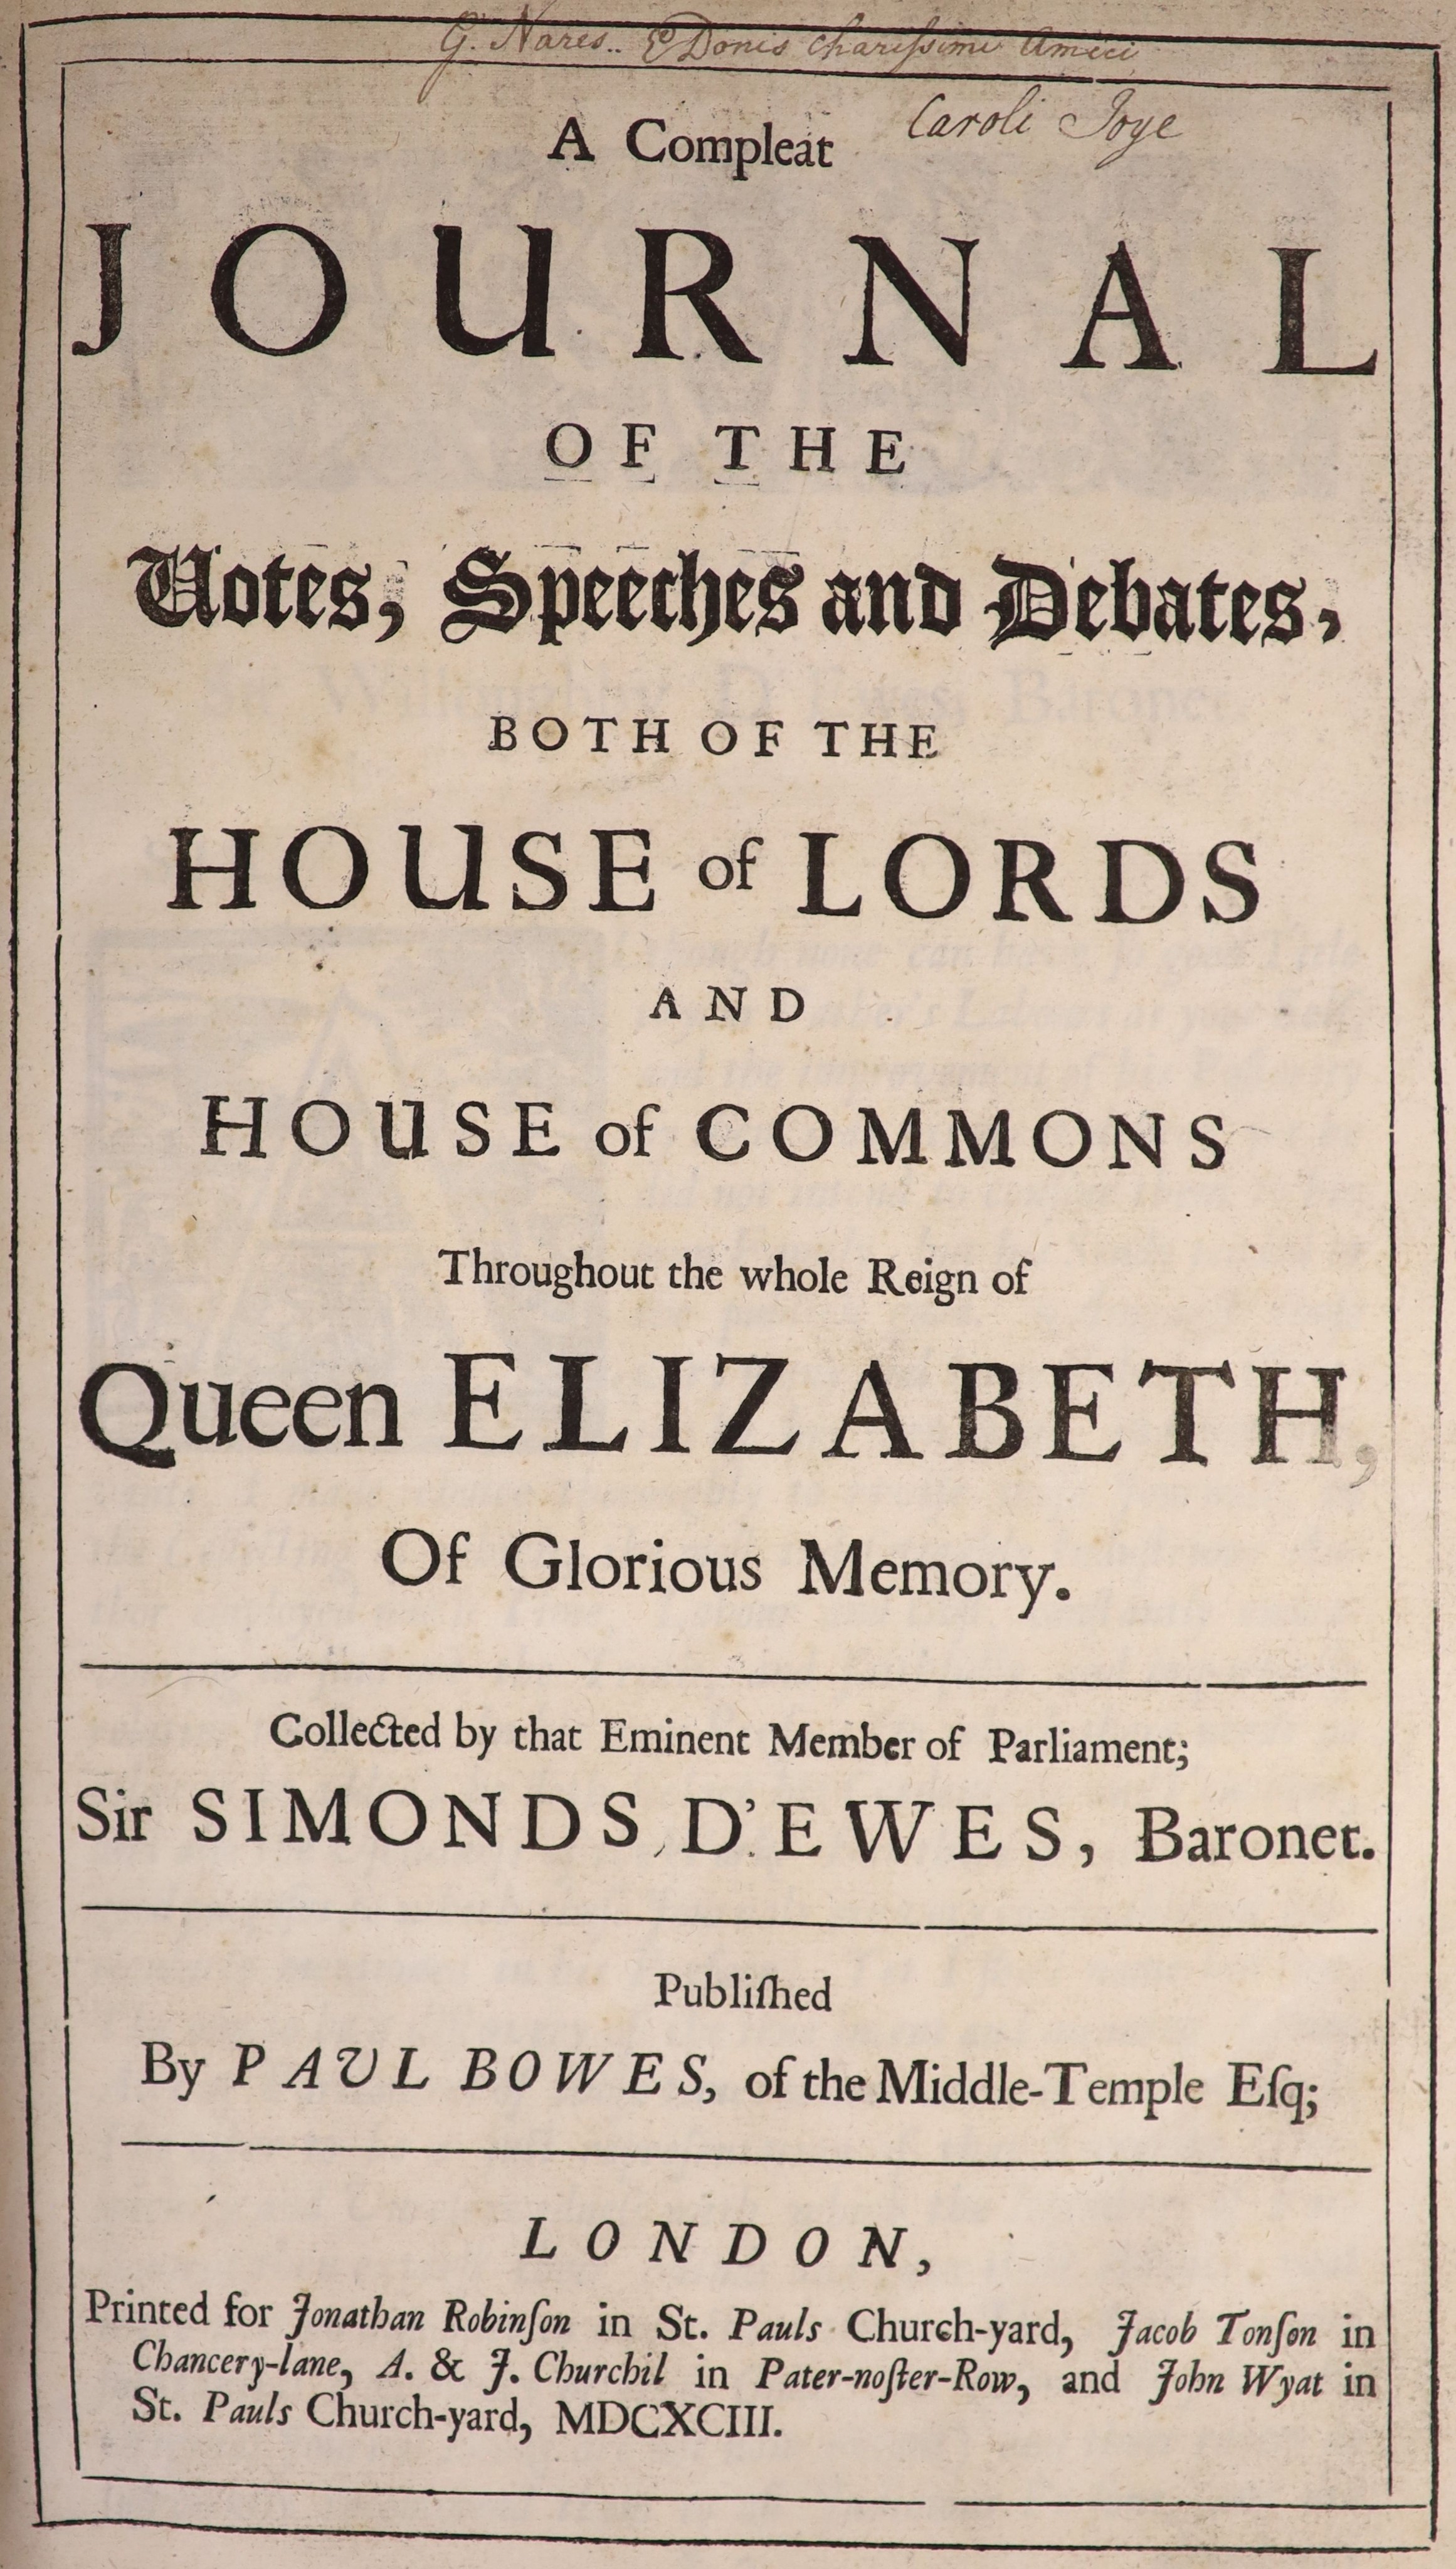 D’Ewes, Sir Simonds - A Compleat, (sic), Journal of the Votes, Speeches and Debates, both of the House of Lords and House of Commons throughout the whole reign of Queen Elizabeth… Large frontis of Queen Elizabeth in Parl